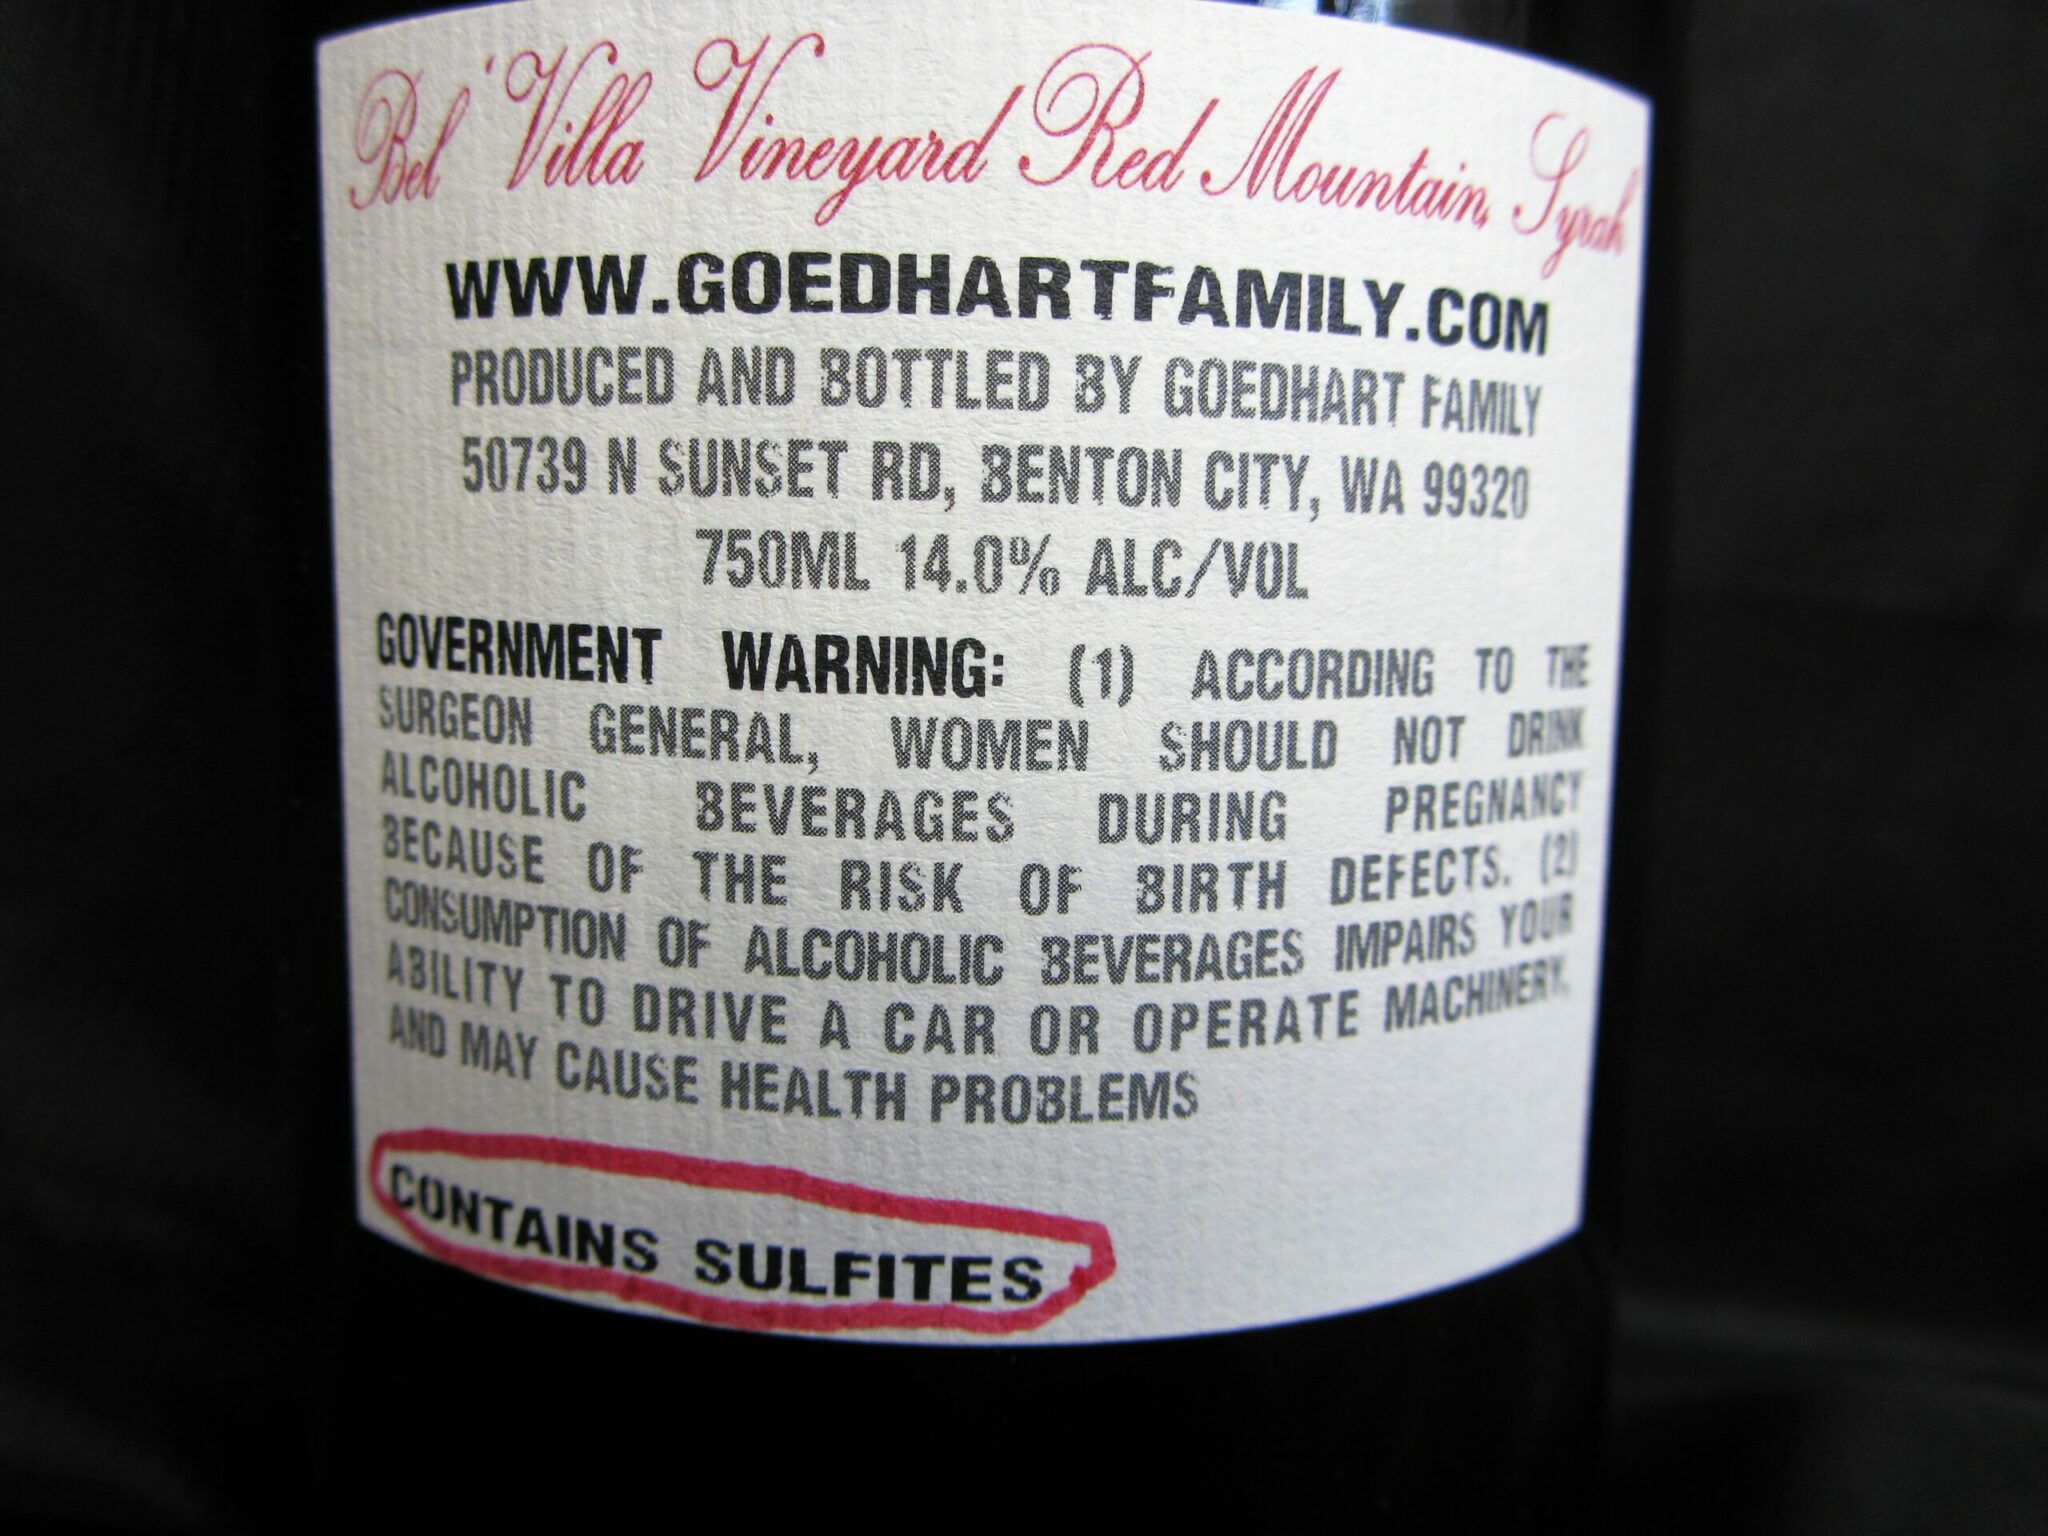 why does wine contain sulfites and how toxic is sulfite when added to wine scaled